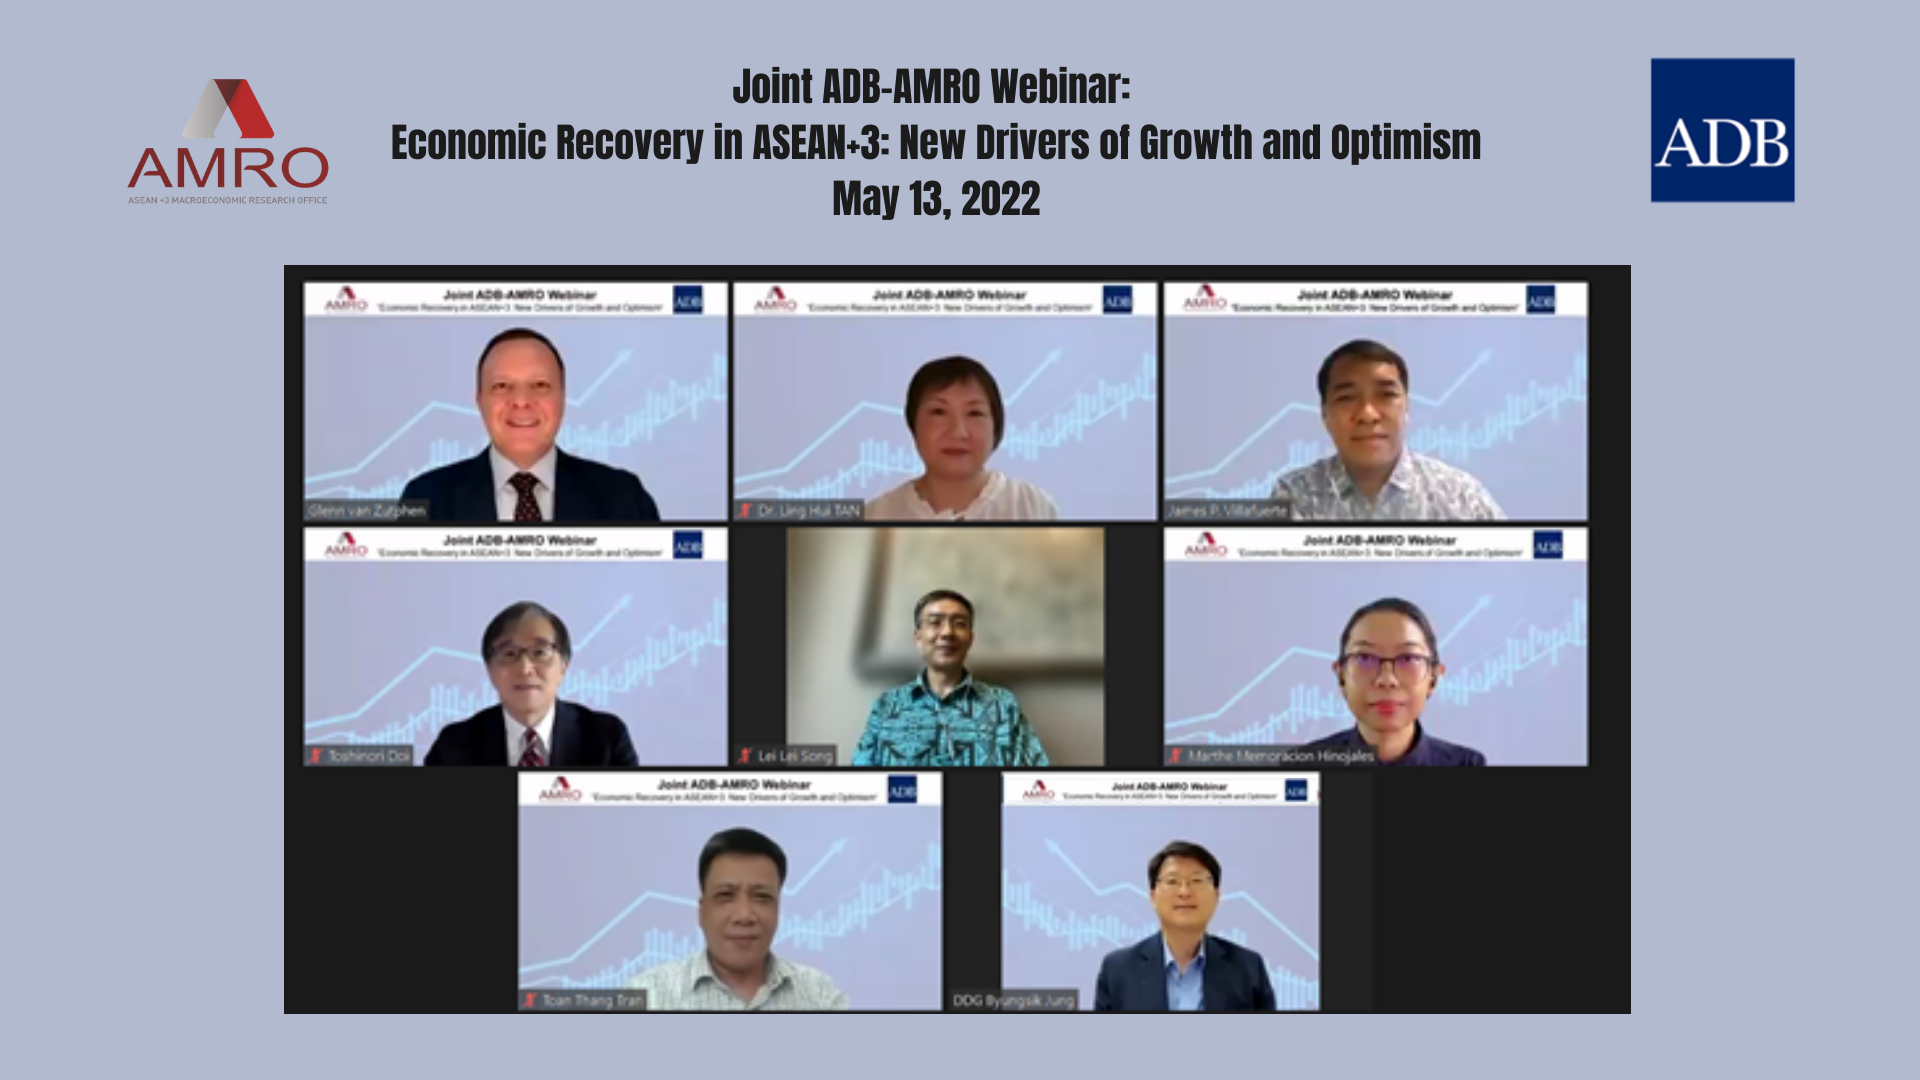 Joint ADB-AMRO Webinar Economic Recovery in ASEAN+3 New Drivers of Growth and Optimism May 13, 2022 (7)